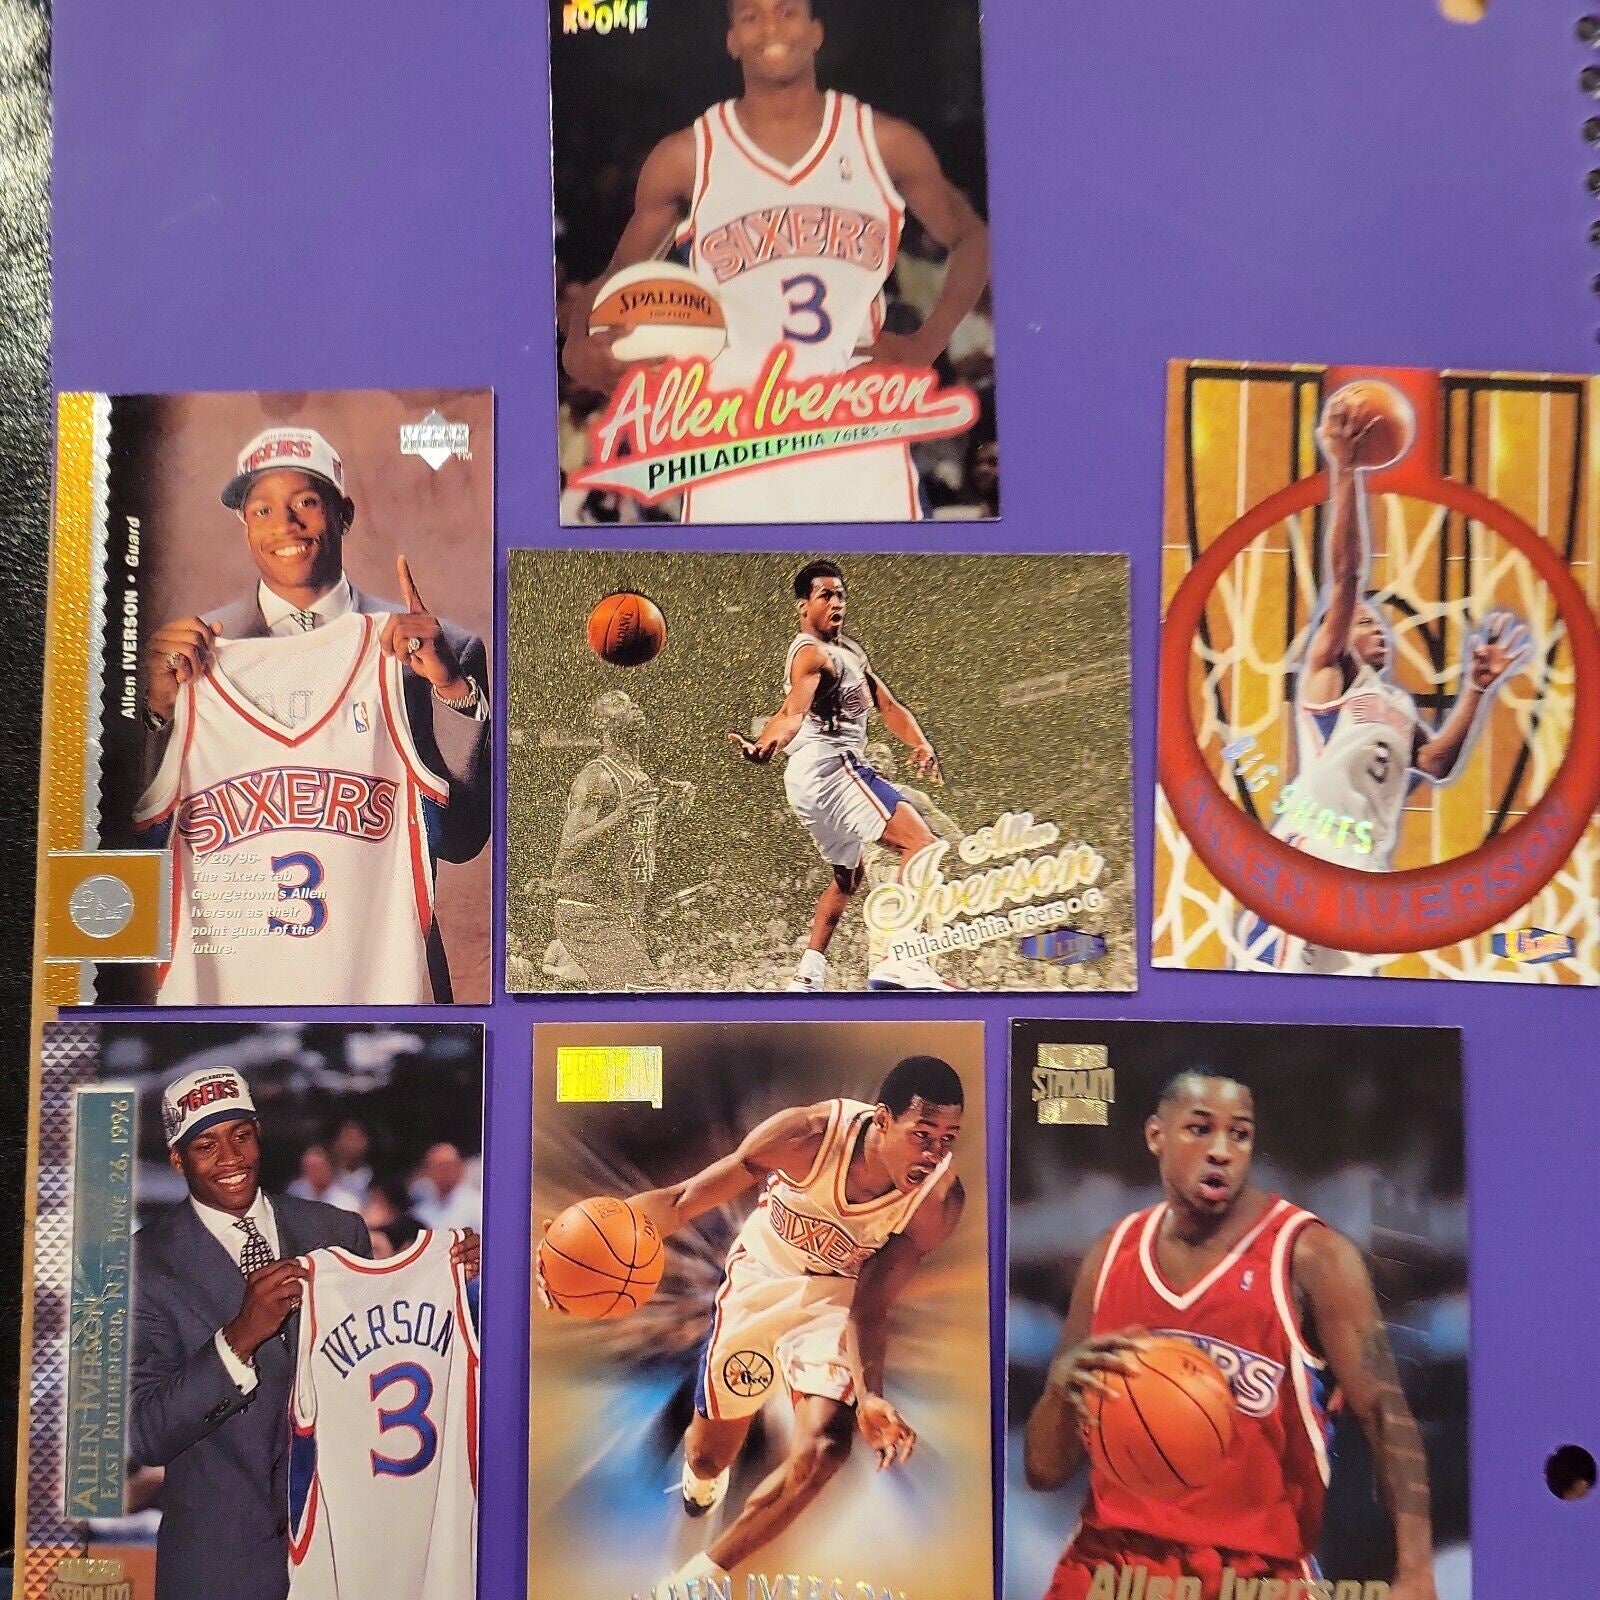 1996-97 Allen Iverson Rookie Card (1x Randomly Selected RC, May Not Be In Picture)